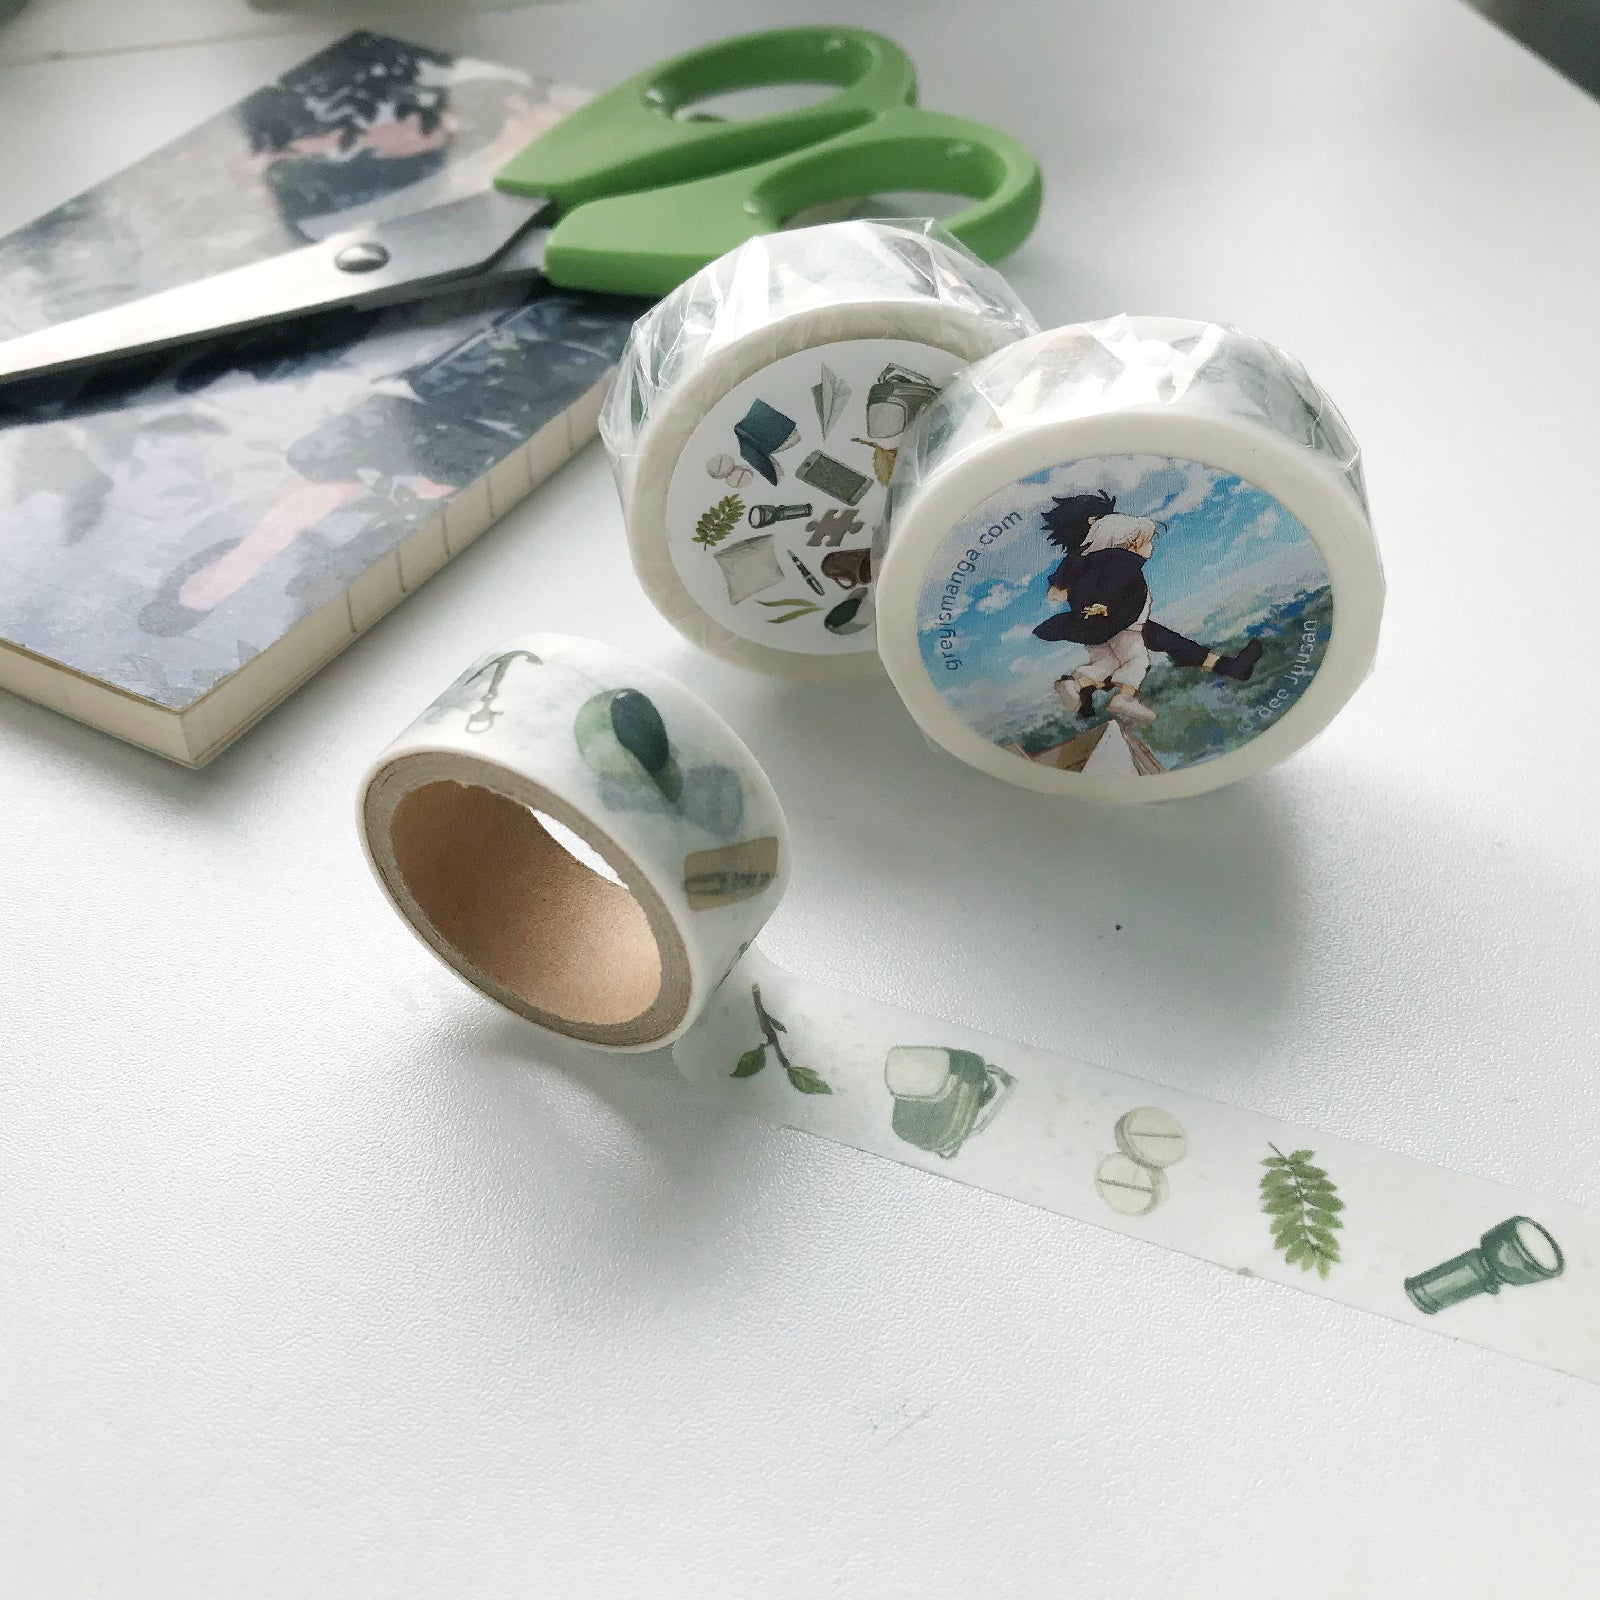 [Washi Tape] All the little things